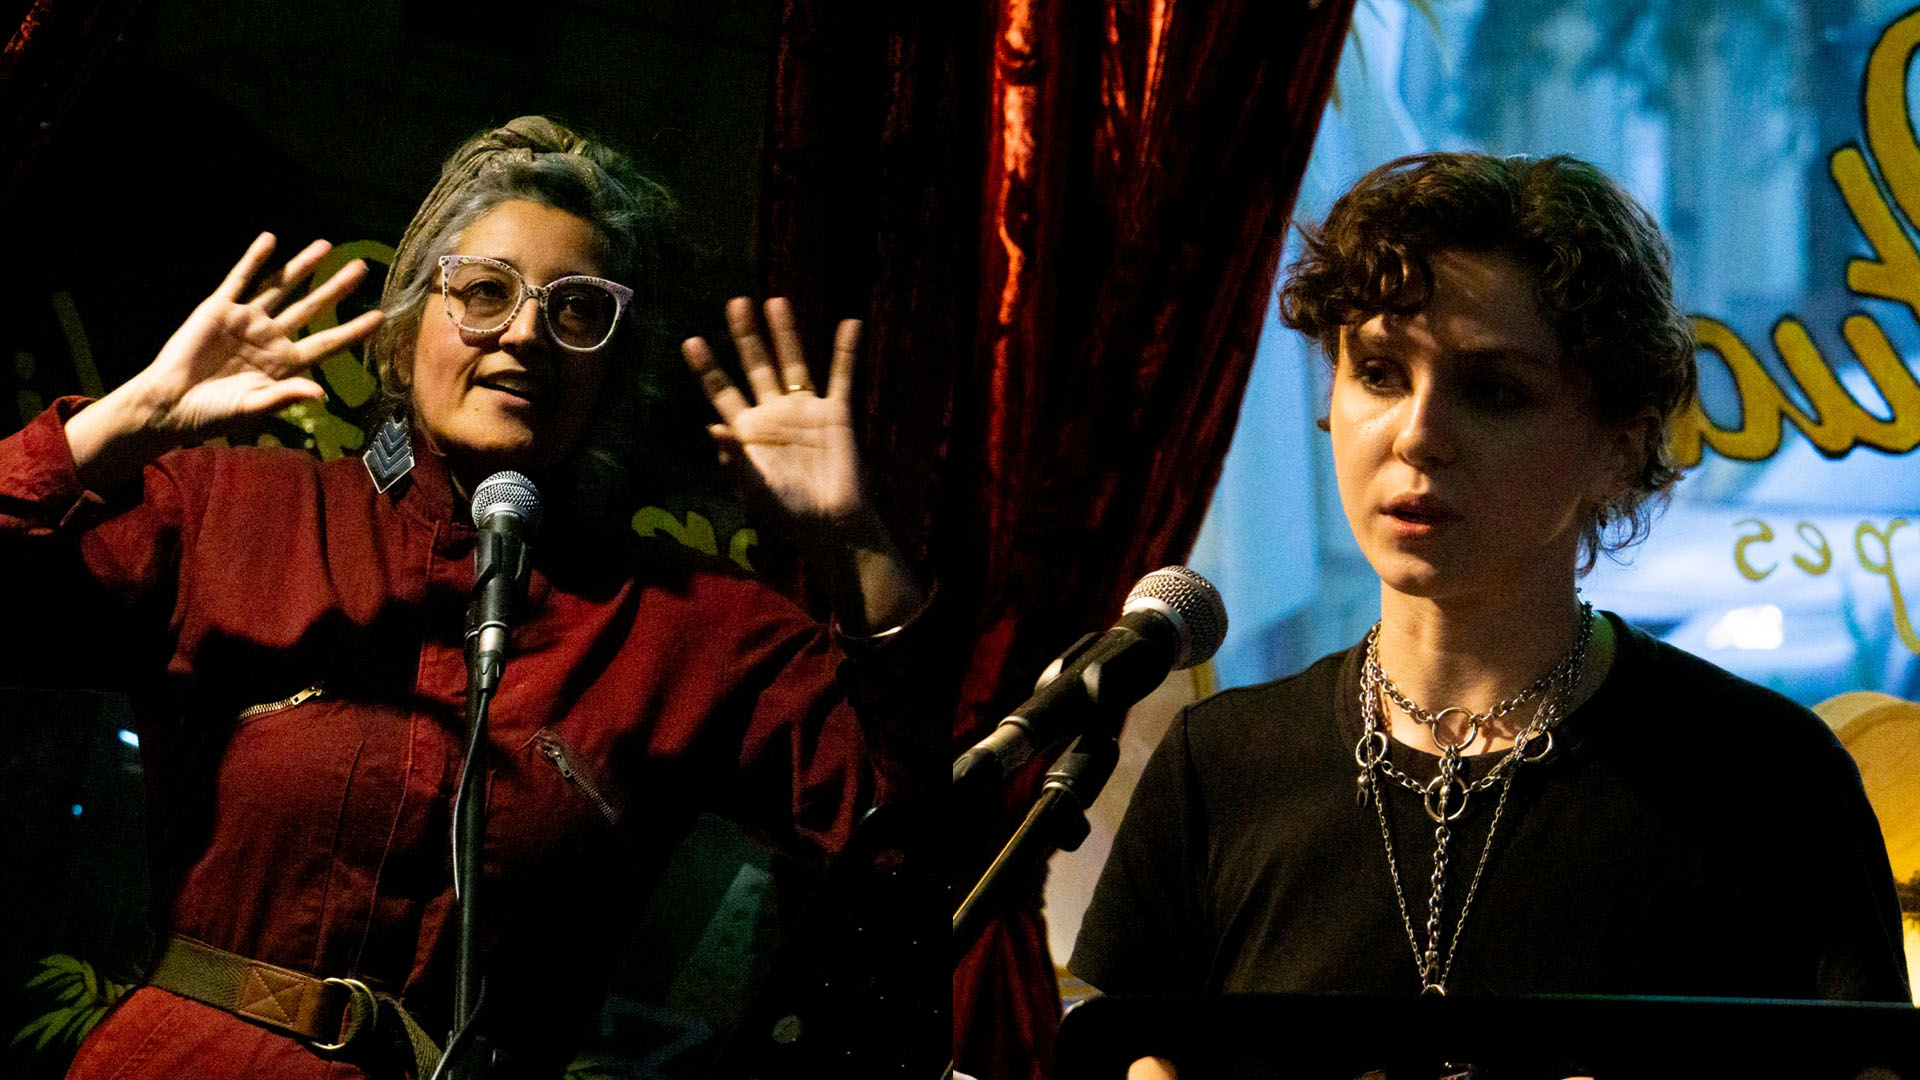 Misbah Wolf and Ria Kealey live at Radio Laria Poetry